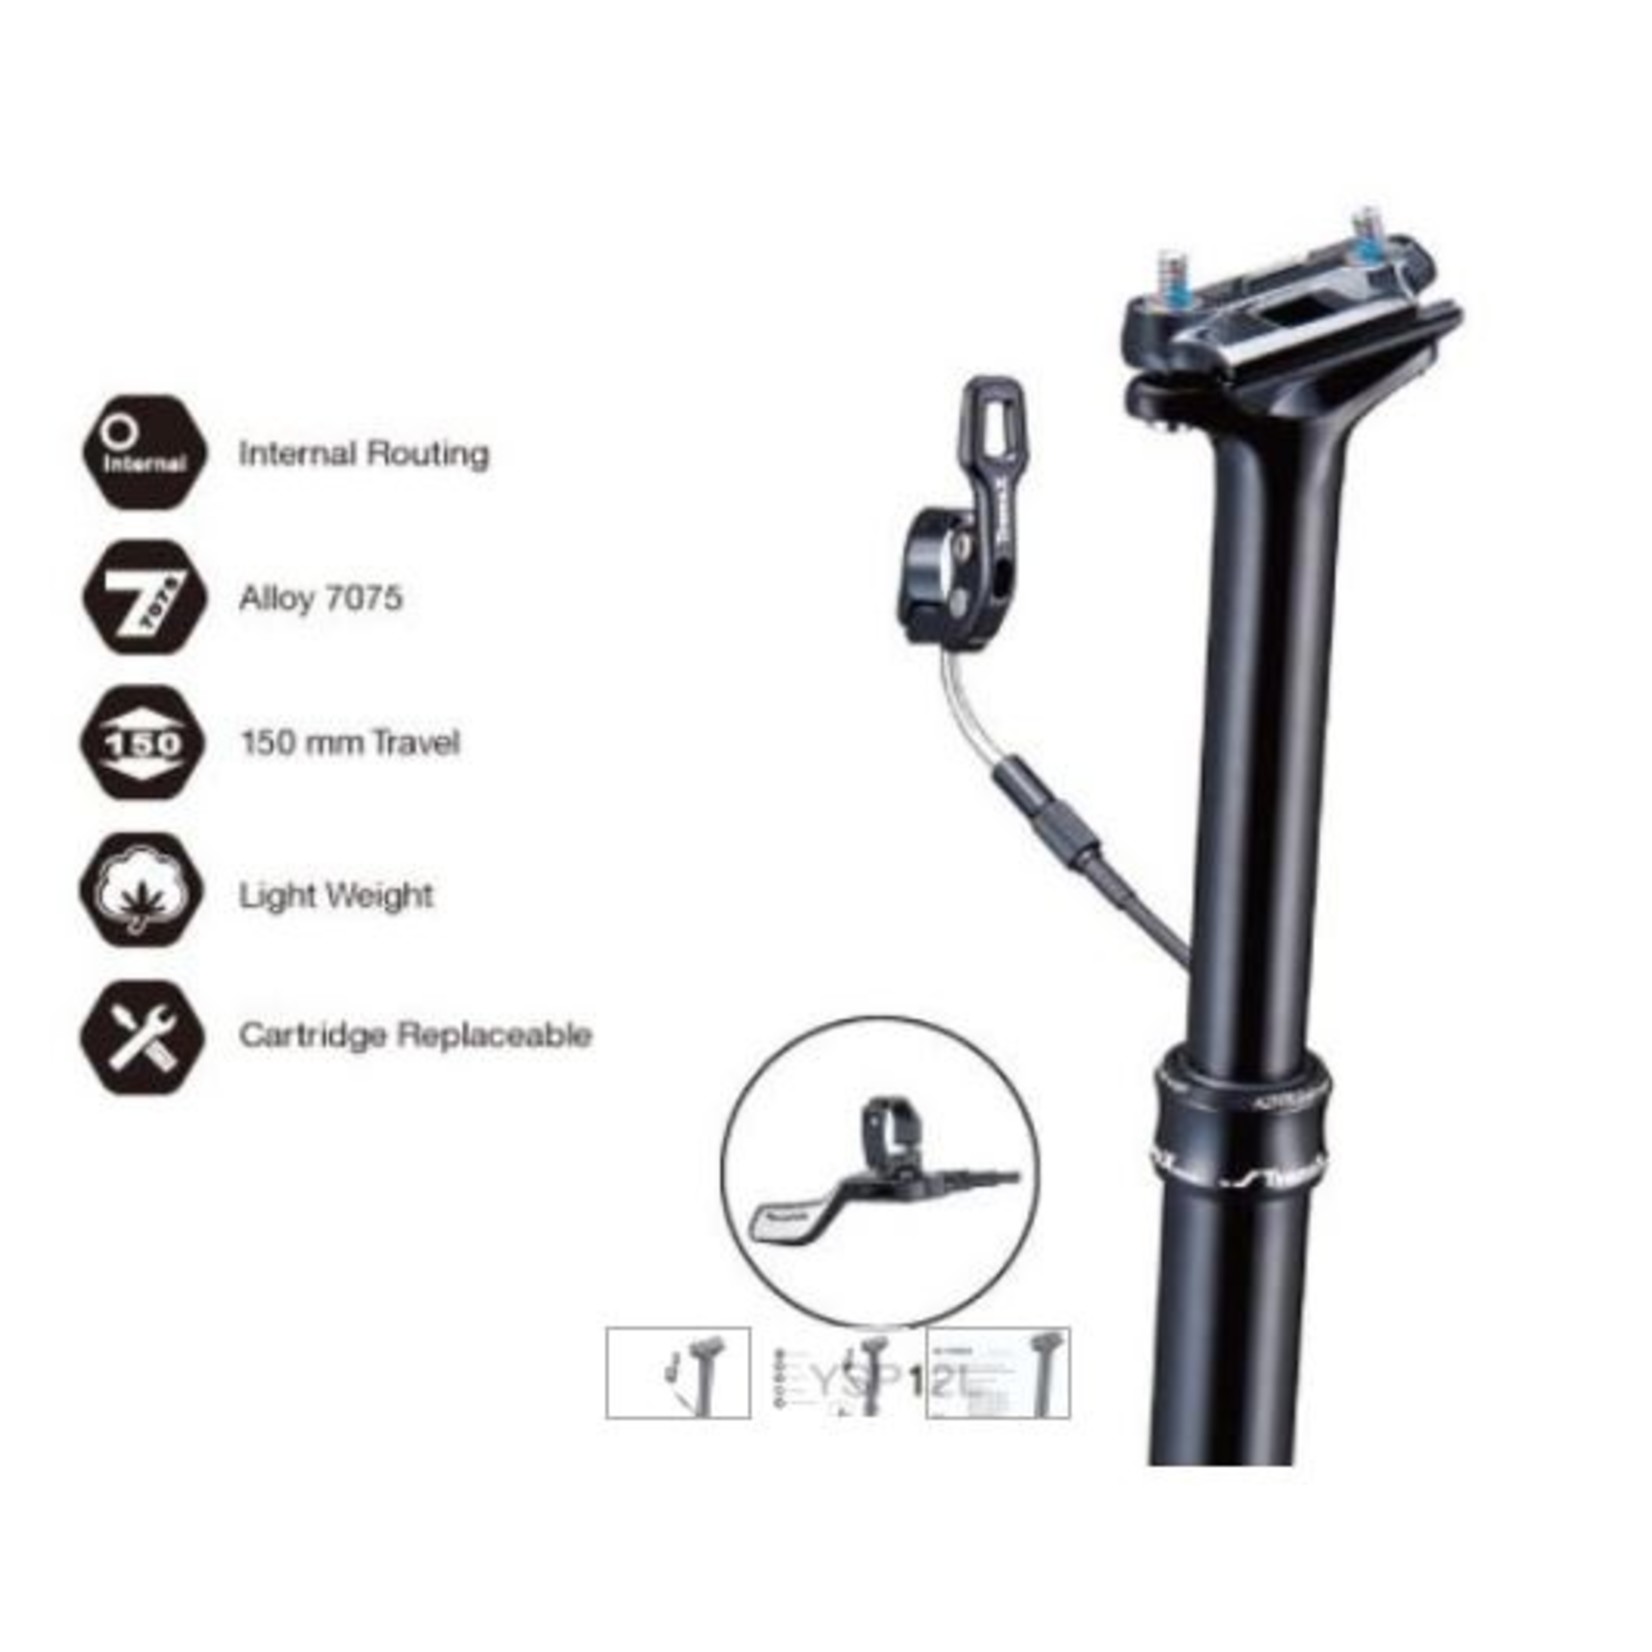 Tranzx Tranzx Bicycle Dropper Seatpost - Internal Routed Cable - 31.6mm - 125mm Travel